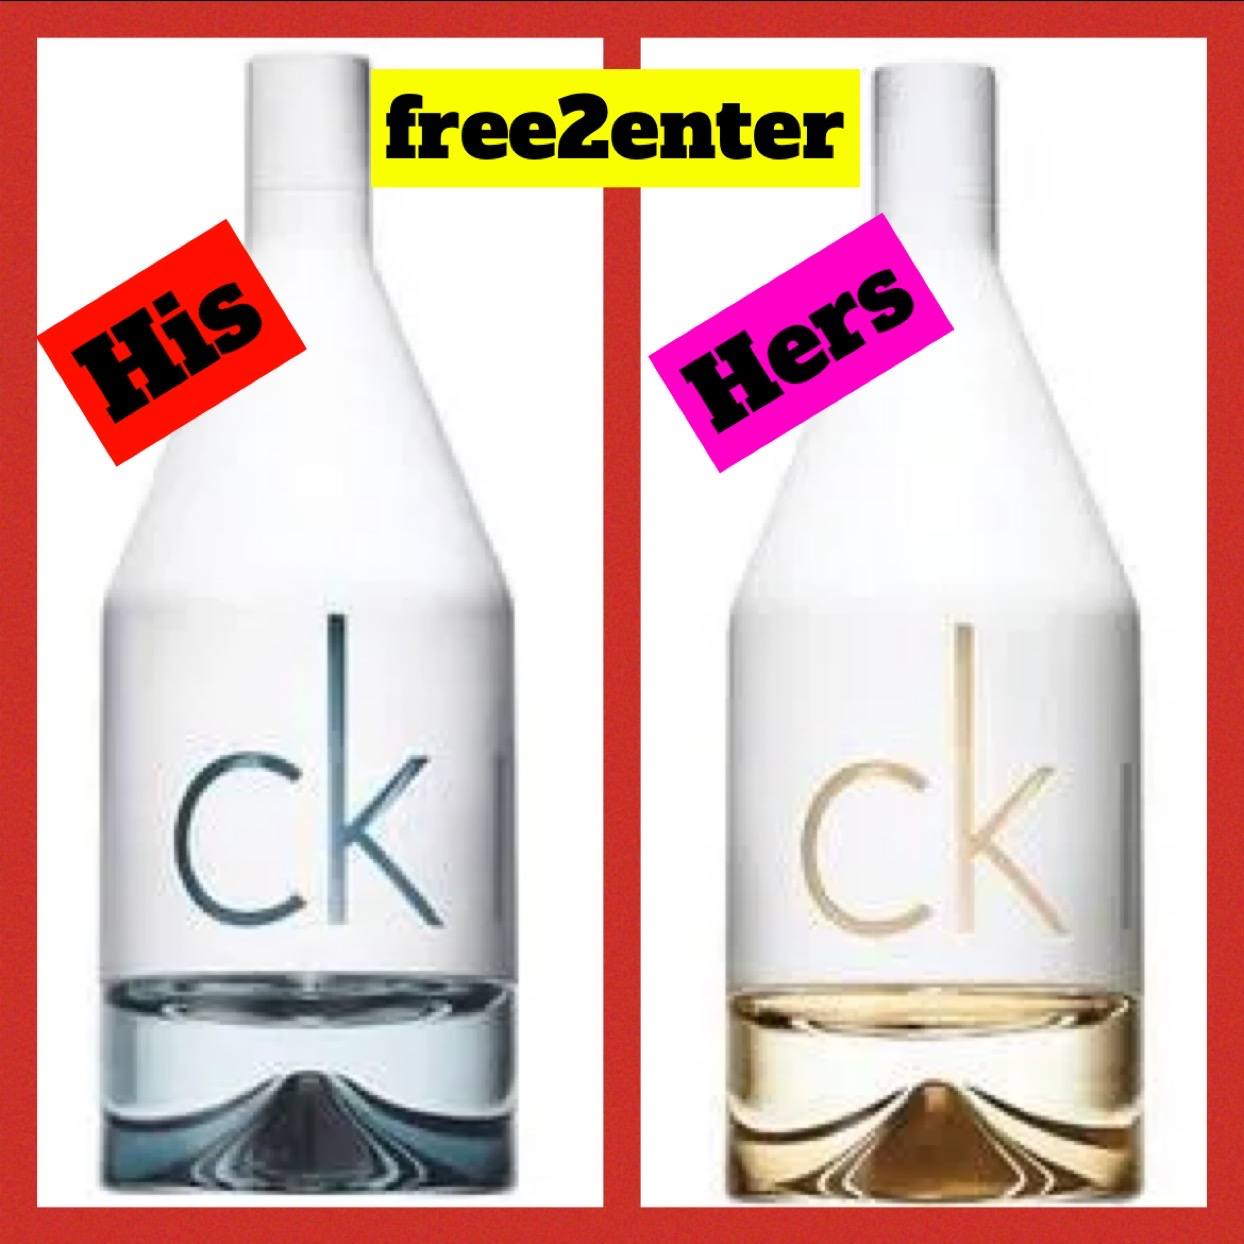 💯free2enter 💯 Calvin Klein His n Hers perfume - Raw Competitions